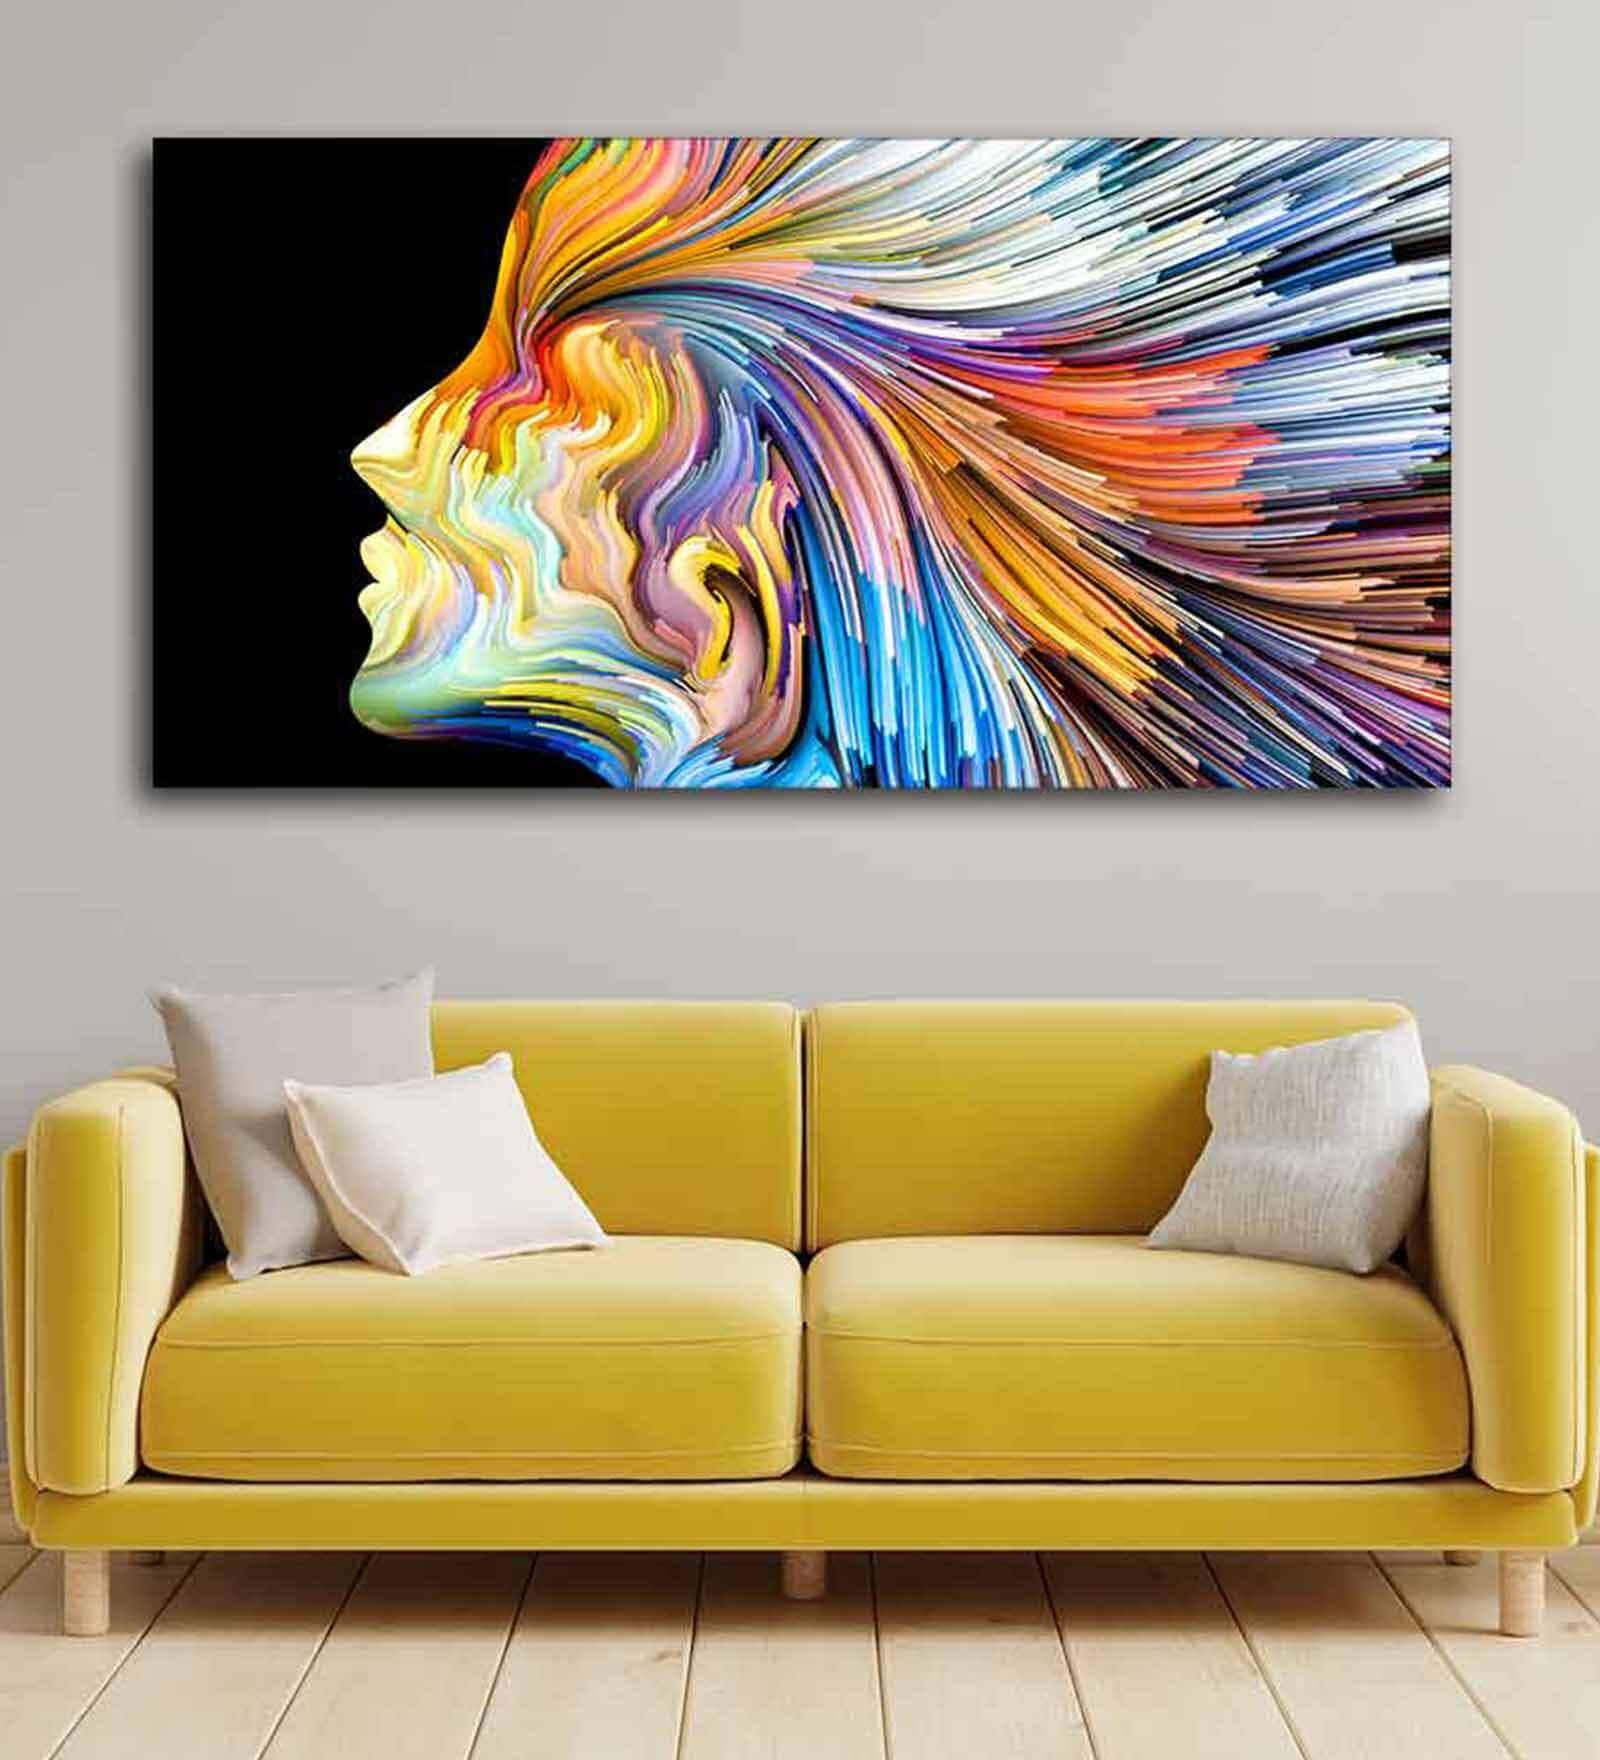 "Bring character and beauty to your home with wall painting art"